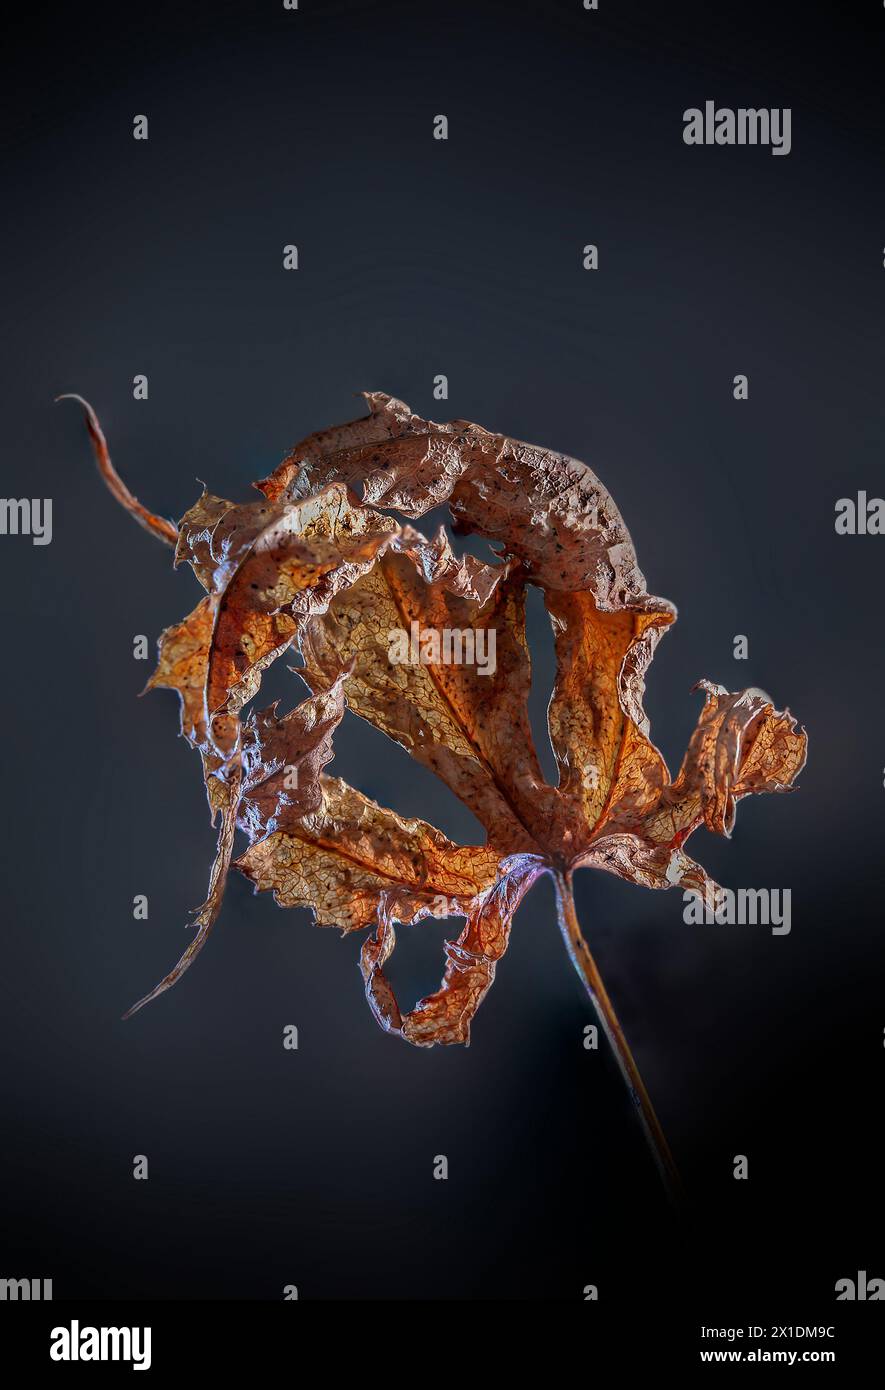 Dried acer leaf with dark background Stock Photo